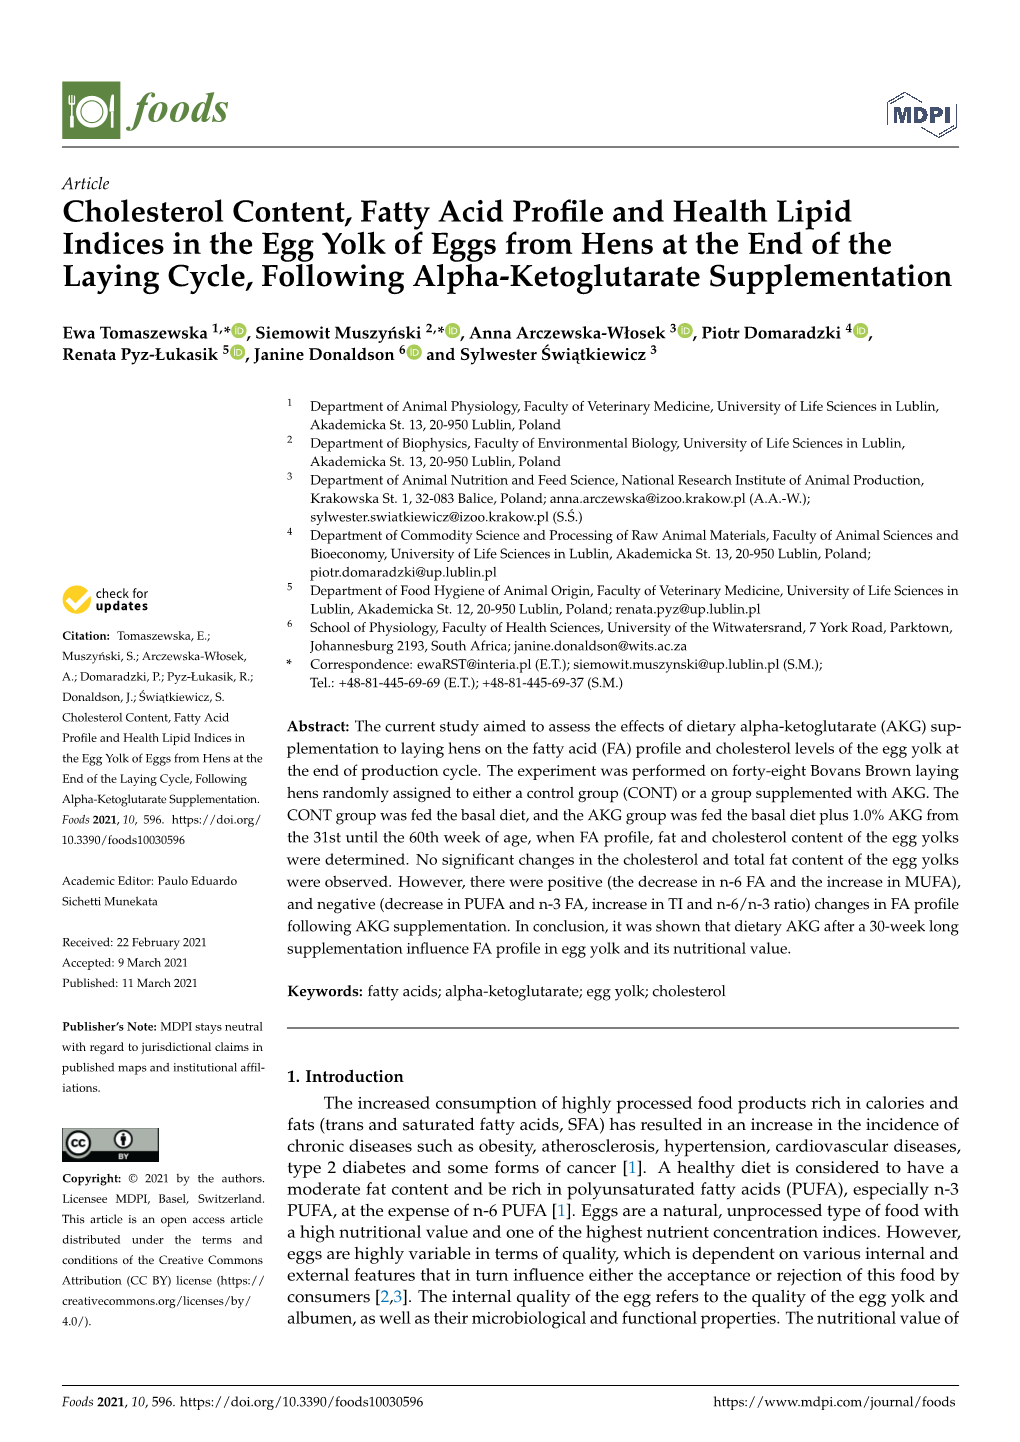 Cholesterol Content, Fatty Acid Profile and Health Lipid Indices in the Egg